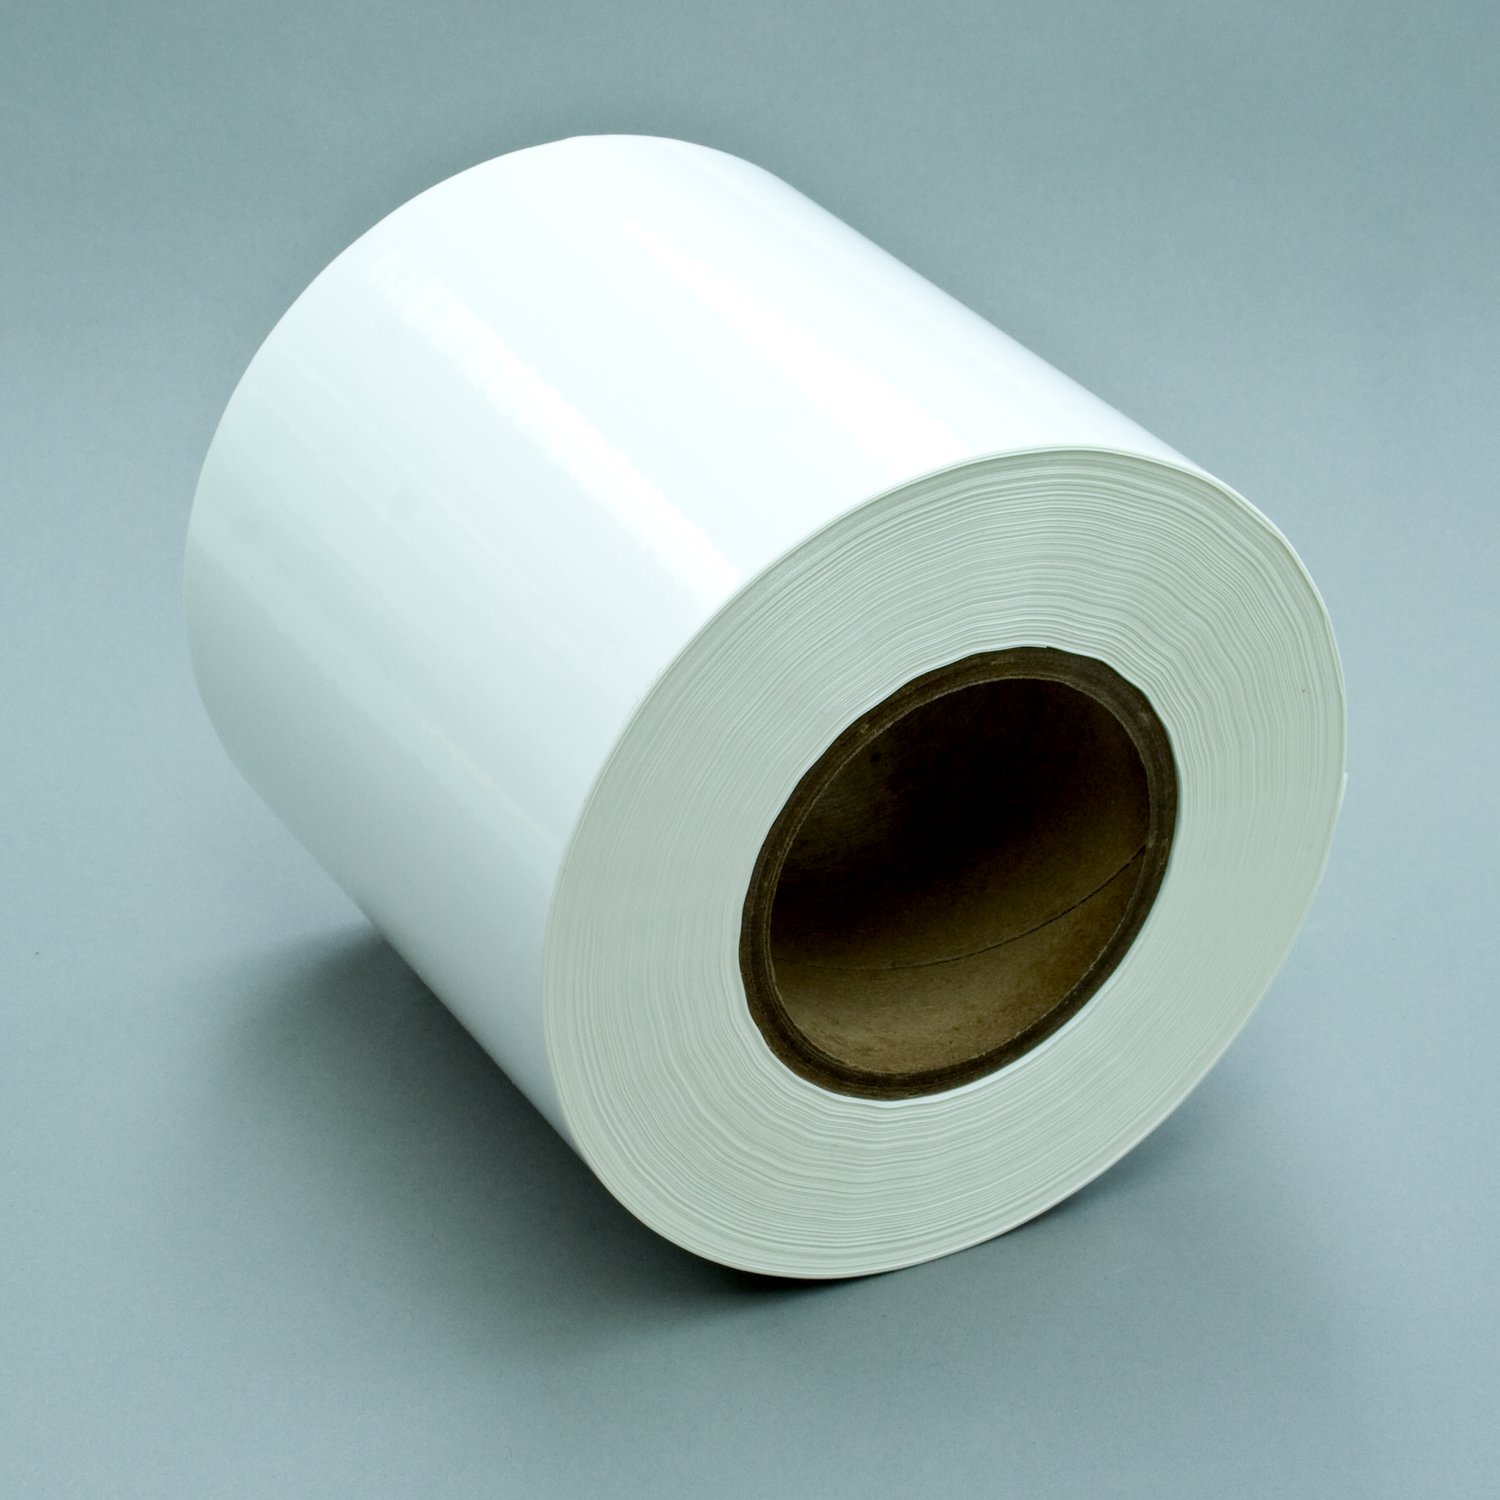 7010045001 - 3M Press Printable Label Material 8418, White Polyester Gloss, 12 in x
333 yd, 1 Roll/Case